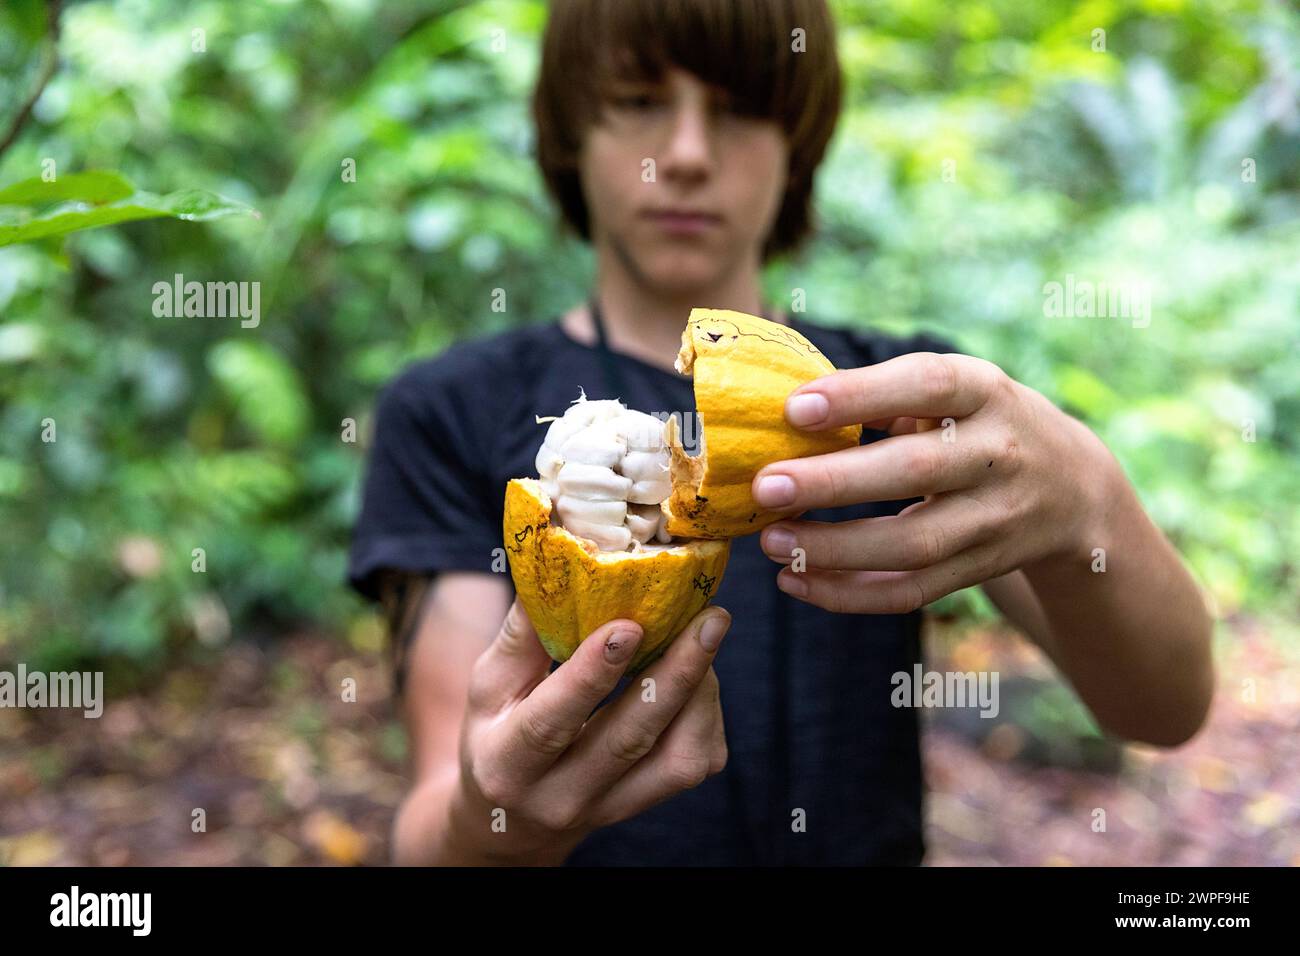 Caucasian boy opening fresh cocoa fruit with his fingers, just taken from tree, Bocas del Toro, Panama, Central America Stock Photo